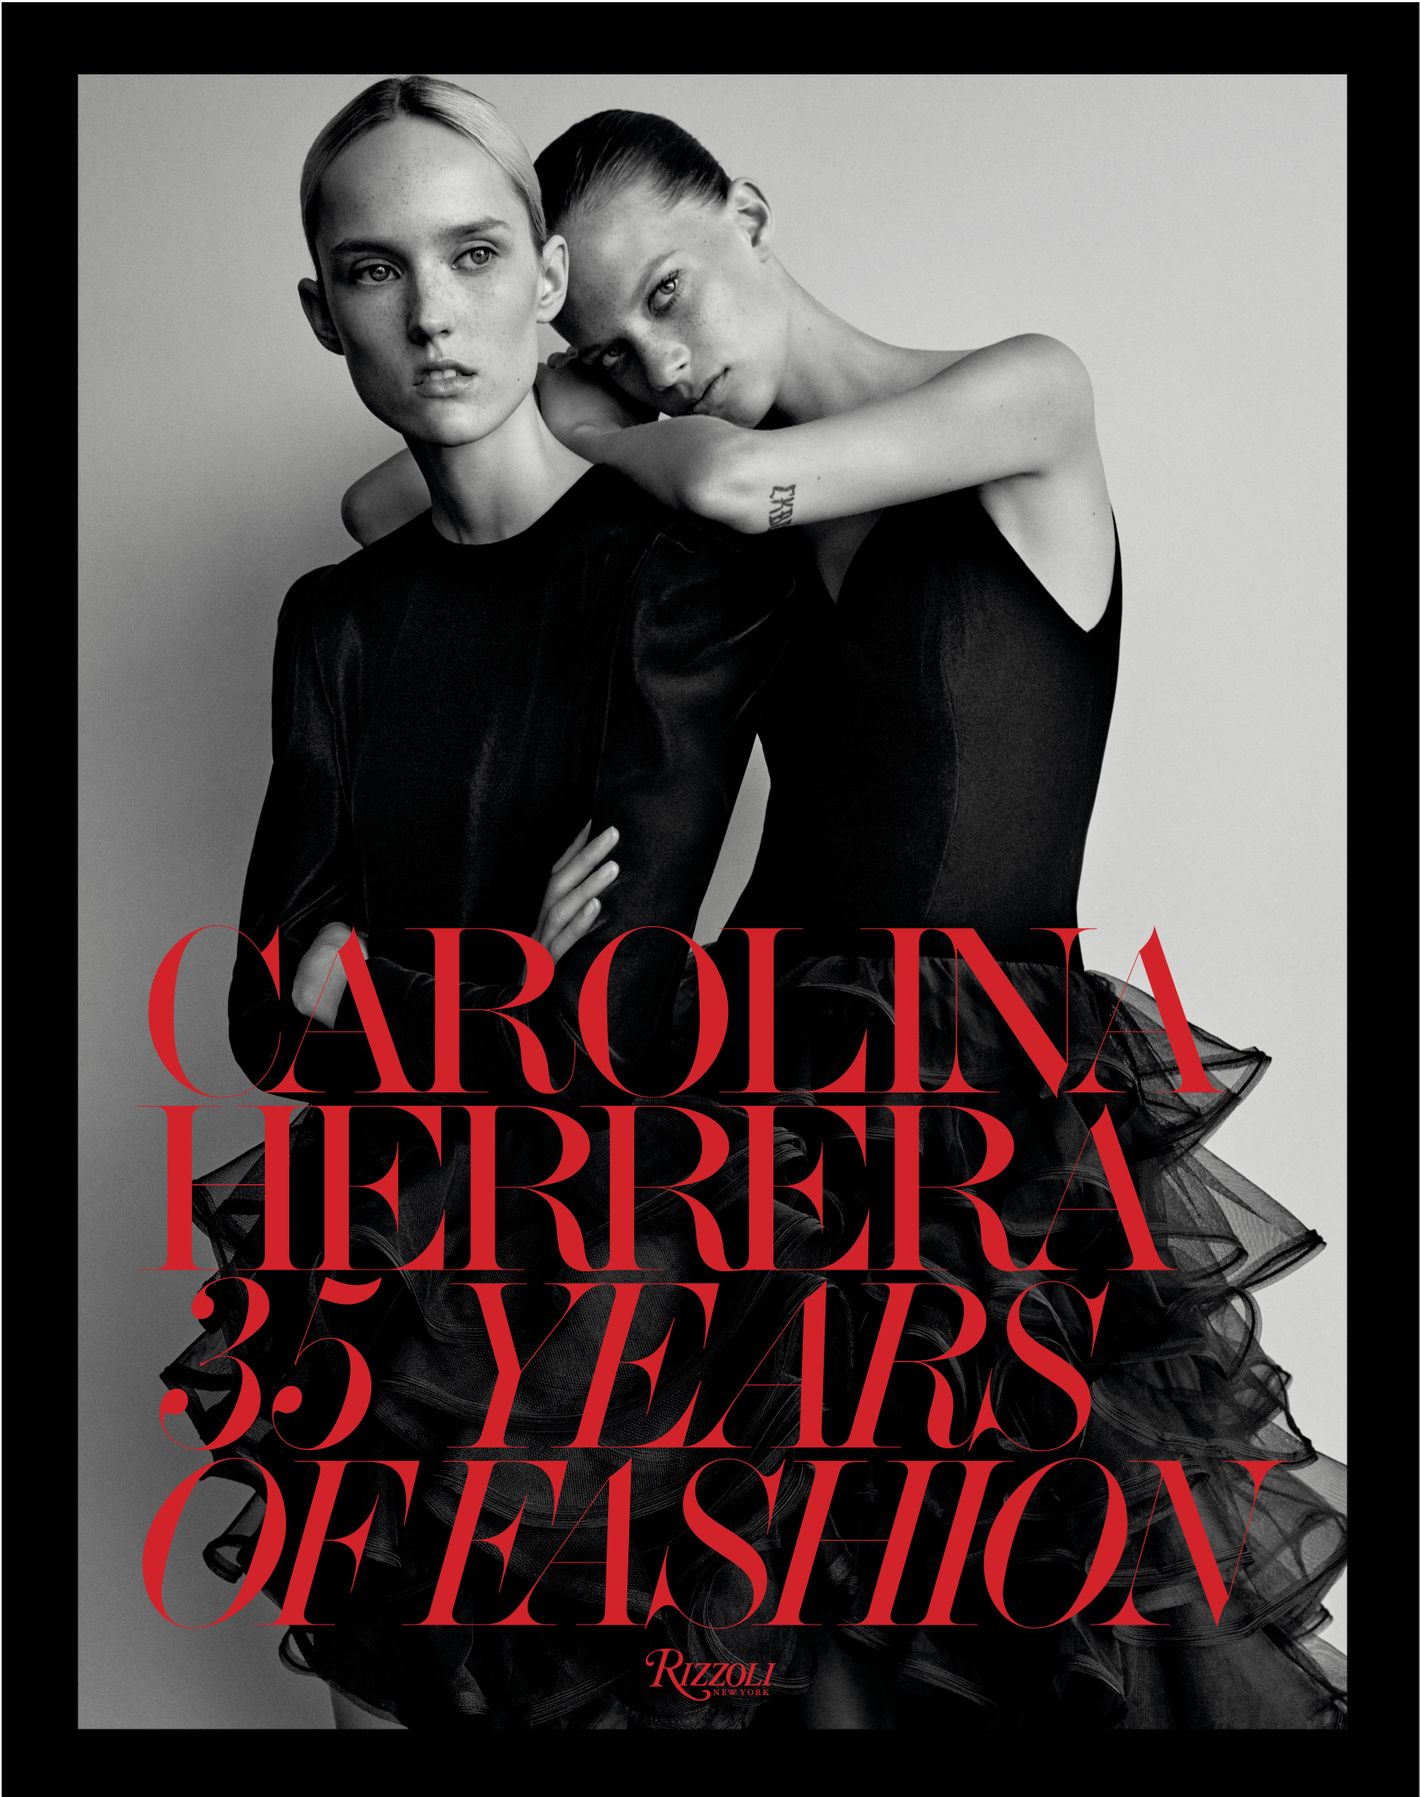 5 Facts about Carolina Herrera in her 35th Anniversary Year